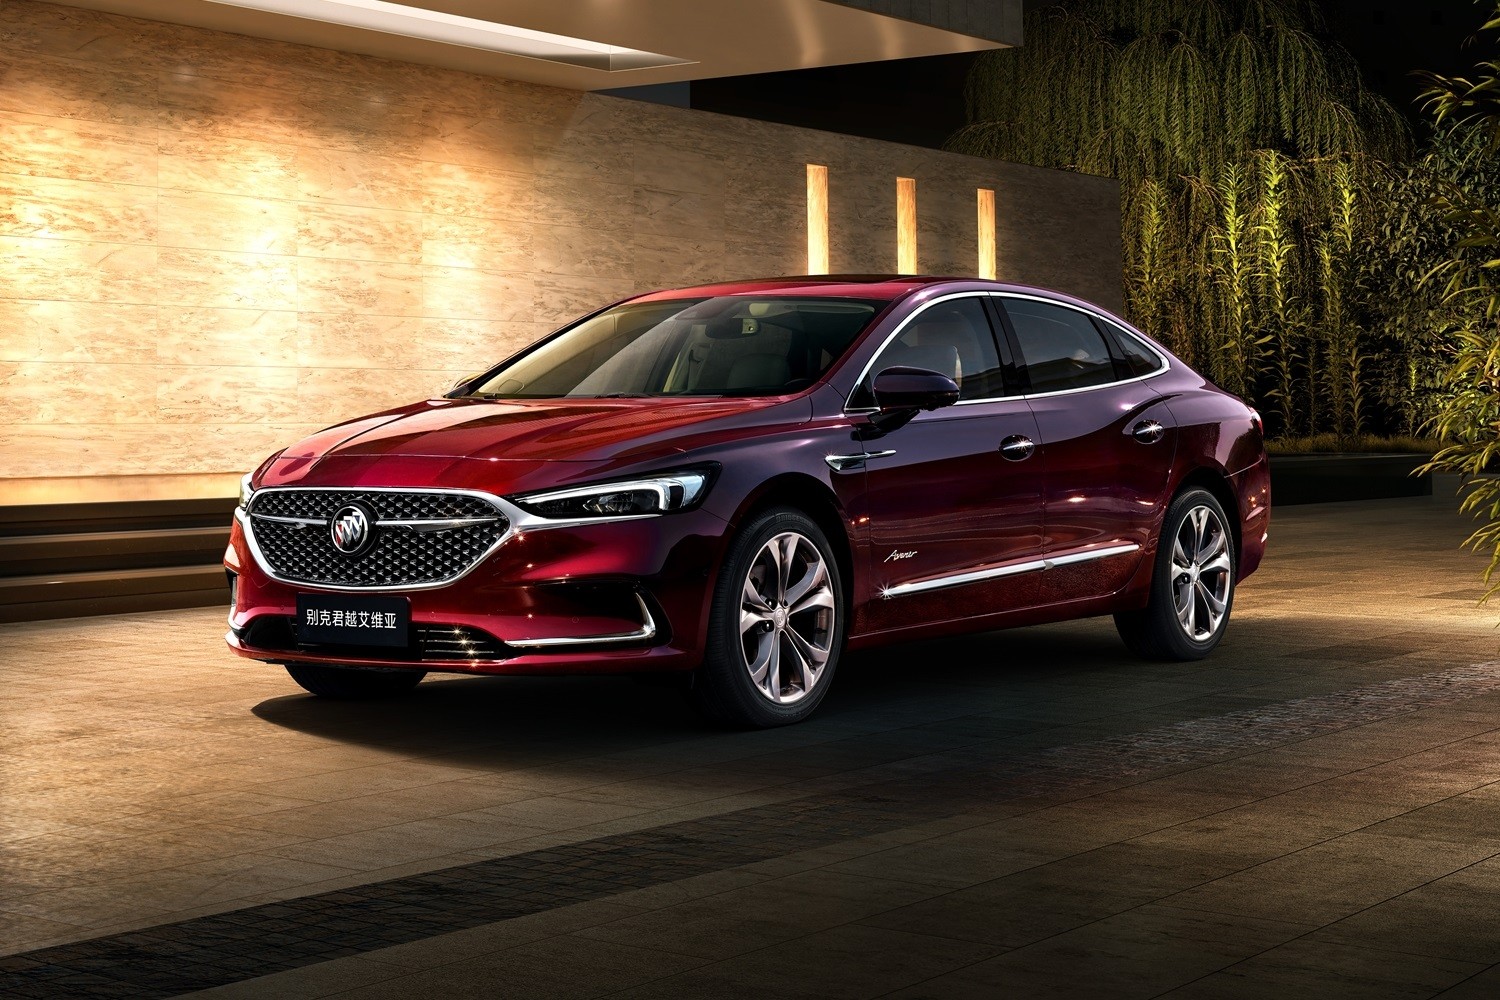 2021 Buick LaCrosse Facelift Looks Pretty Luxurious With Avenir Goodies